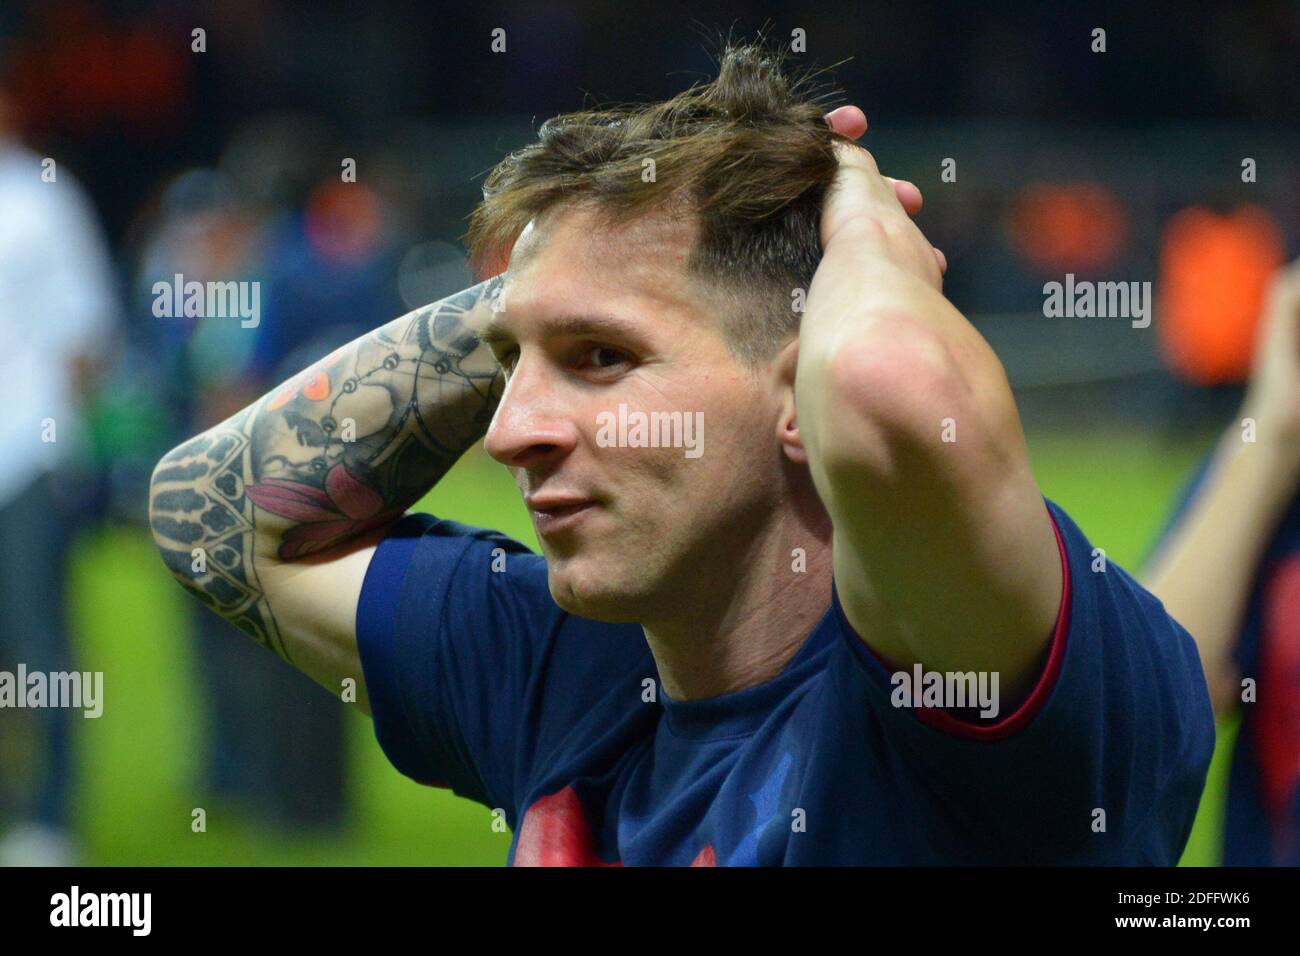 File photo - Barcelona's Lionel Messi celebrates after winning the Champion's  League Final soccer match, Barcelona vs Juventus in Berlin, Germany, on  June 6th, 2015. Barcelona won 3-1. Argentine football star Lionel